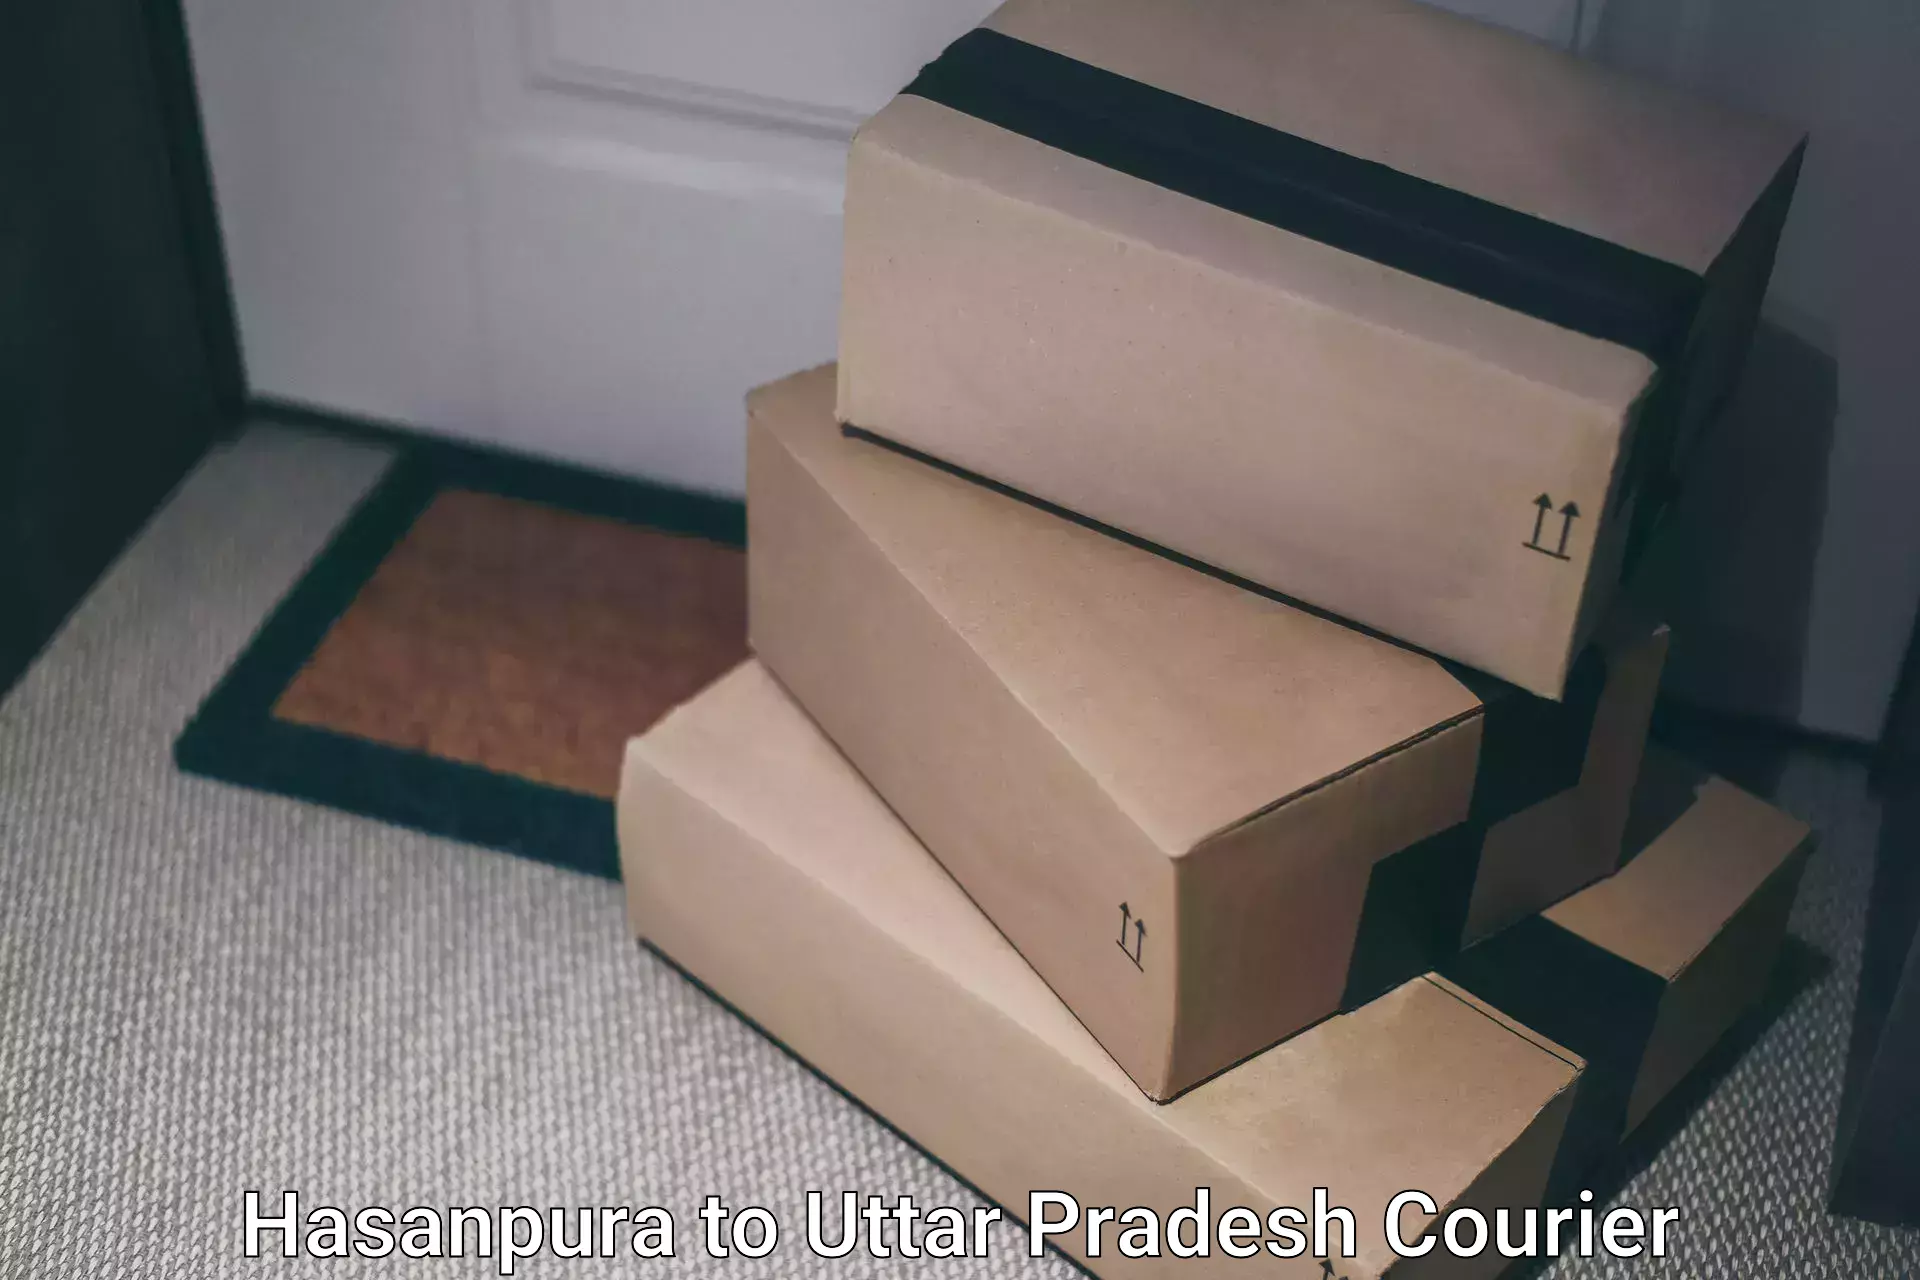 Postal and courier services in Hasanpura to Bhadohi